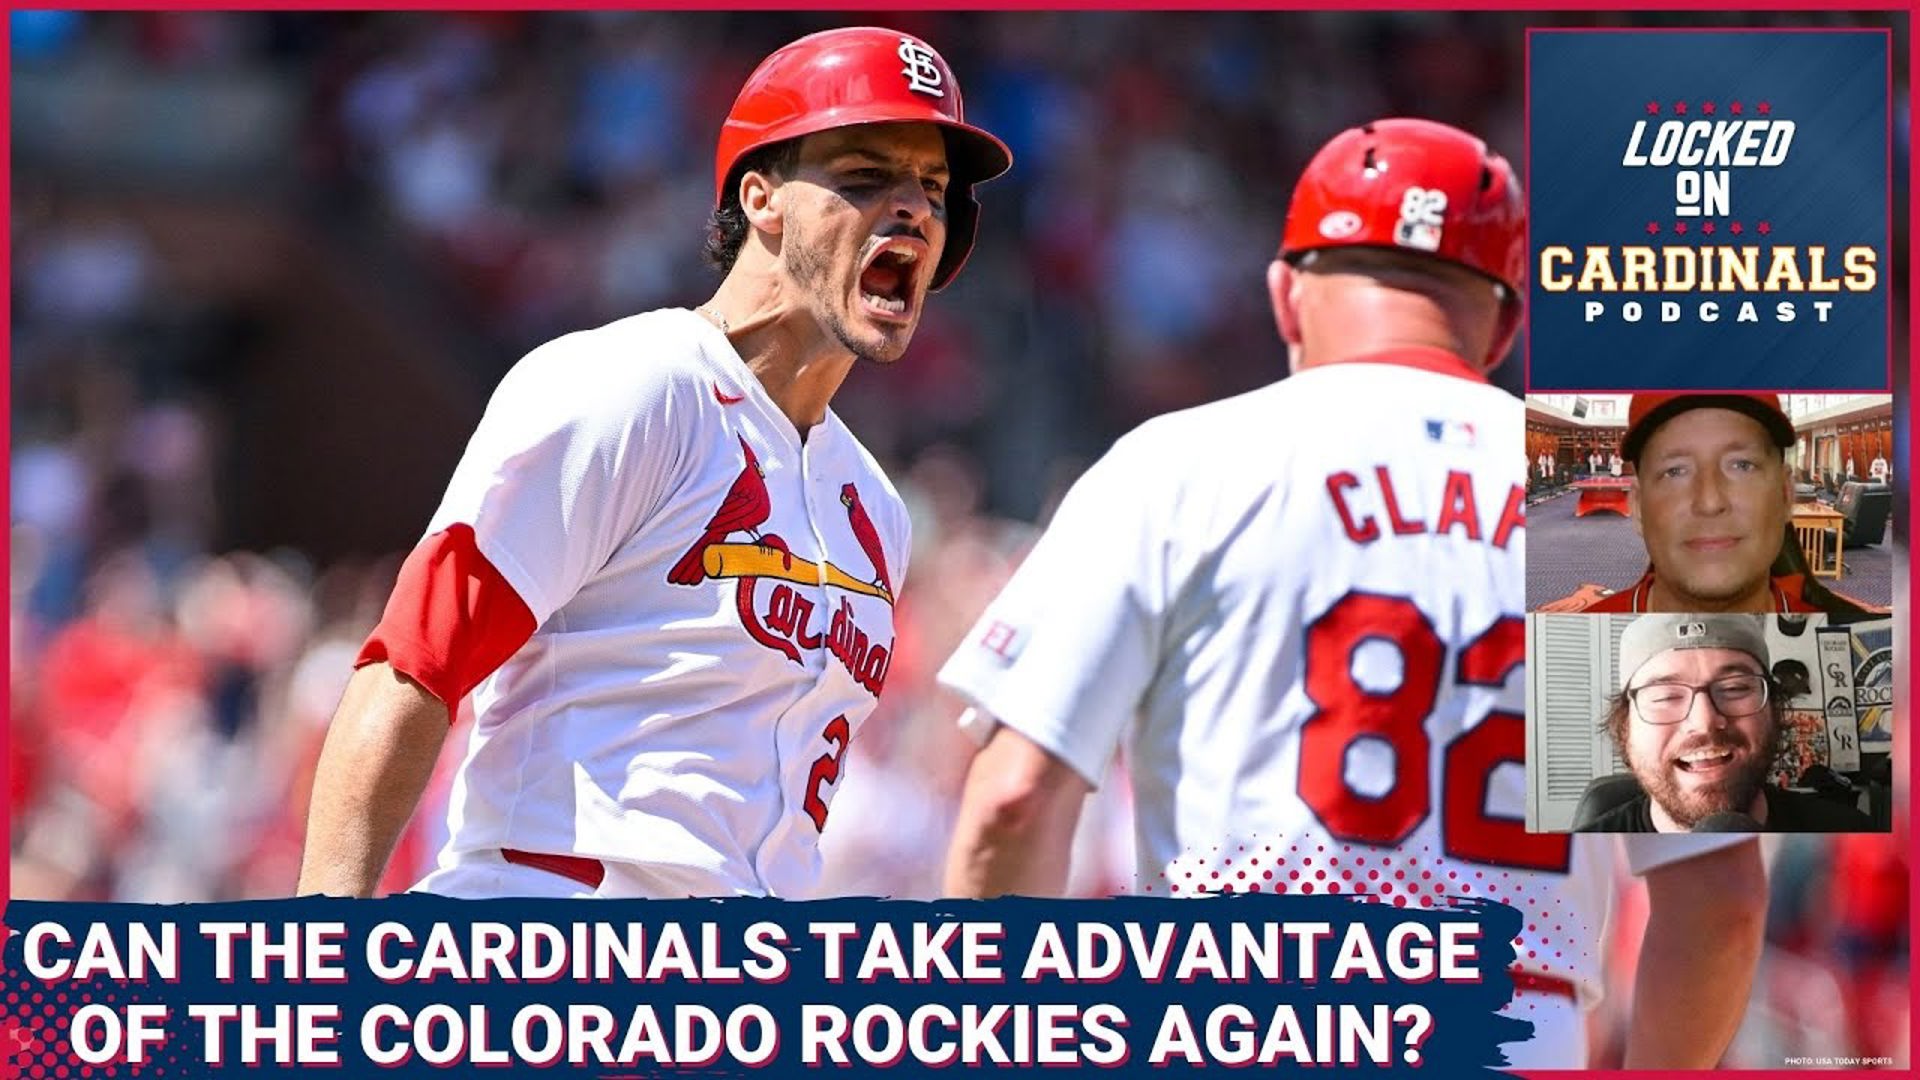 The Cardinals Have A Chance To Get Past The .500 Mark As They Host The Rockies For 4 Games At Busch